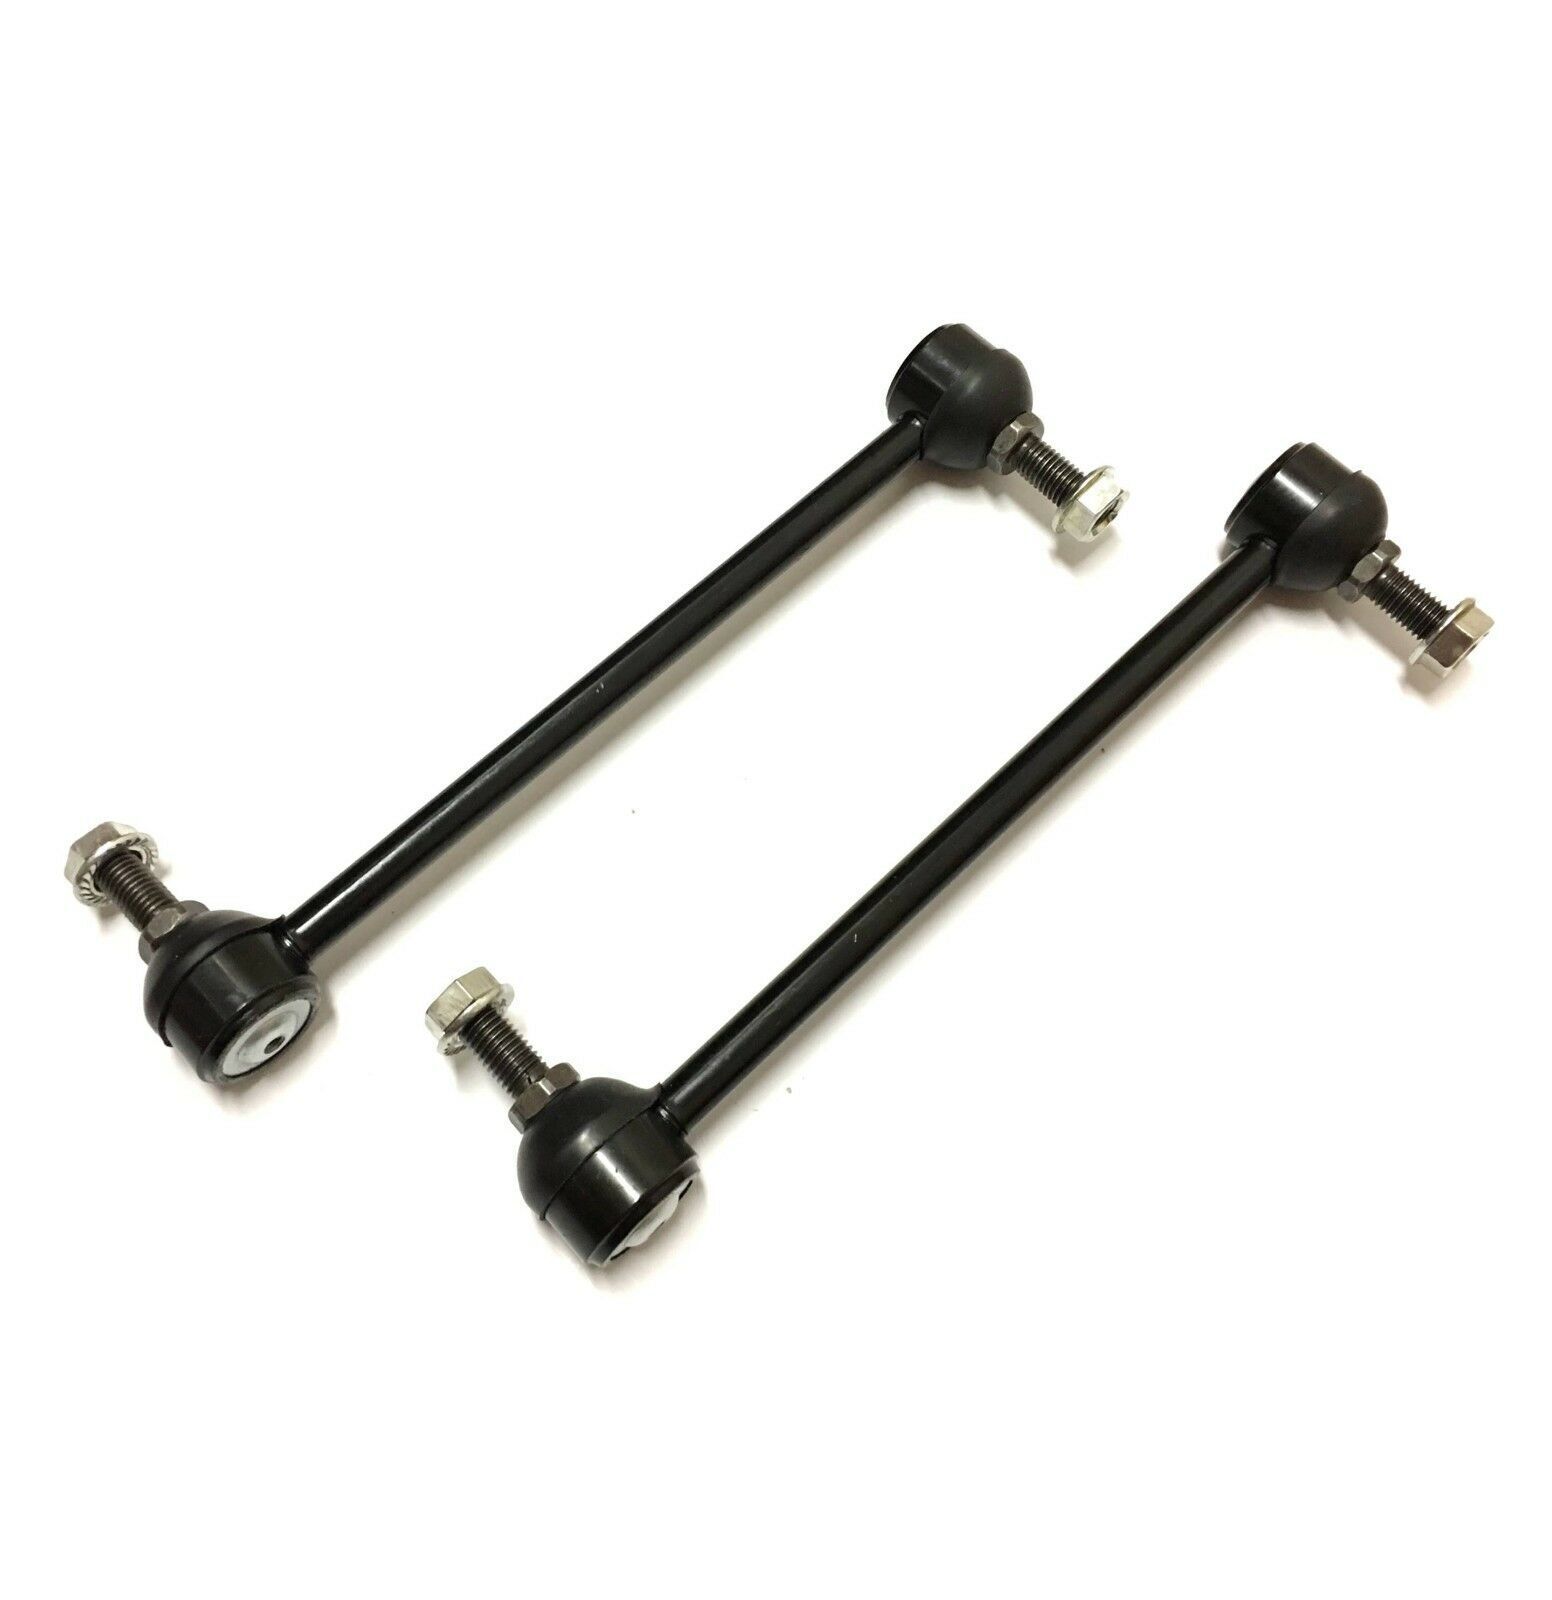 2 Front Sway Bar End Links for Lexus ES300 ES330 RX330 Toyota Avalon Camry Venza